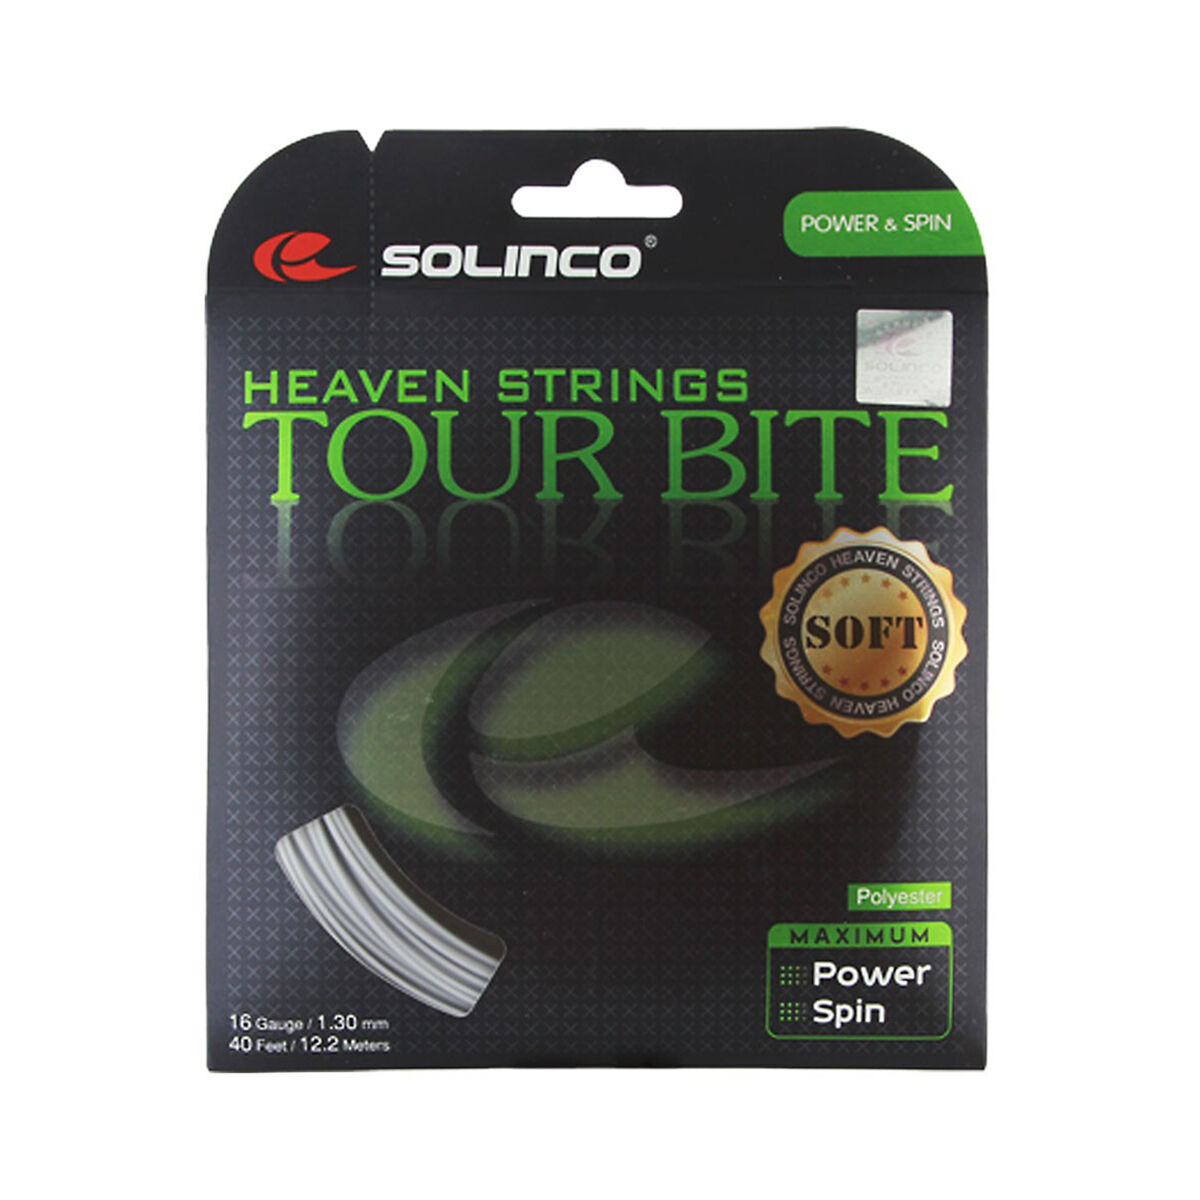 best tension for solinco tour bite